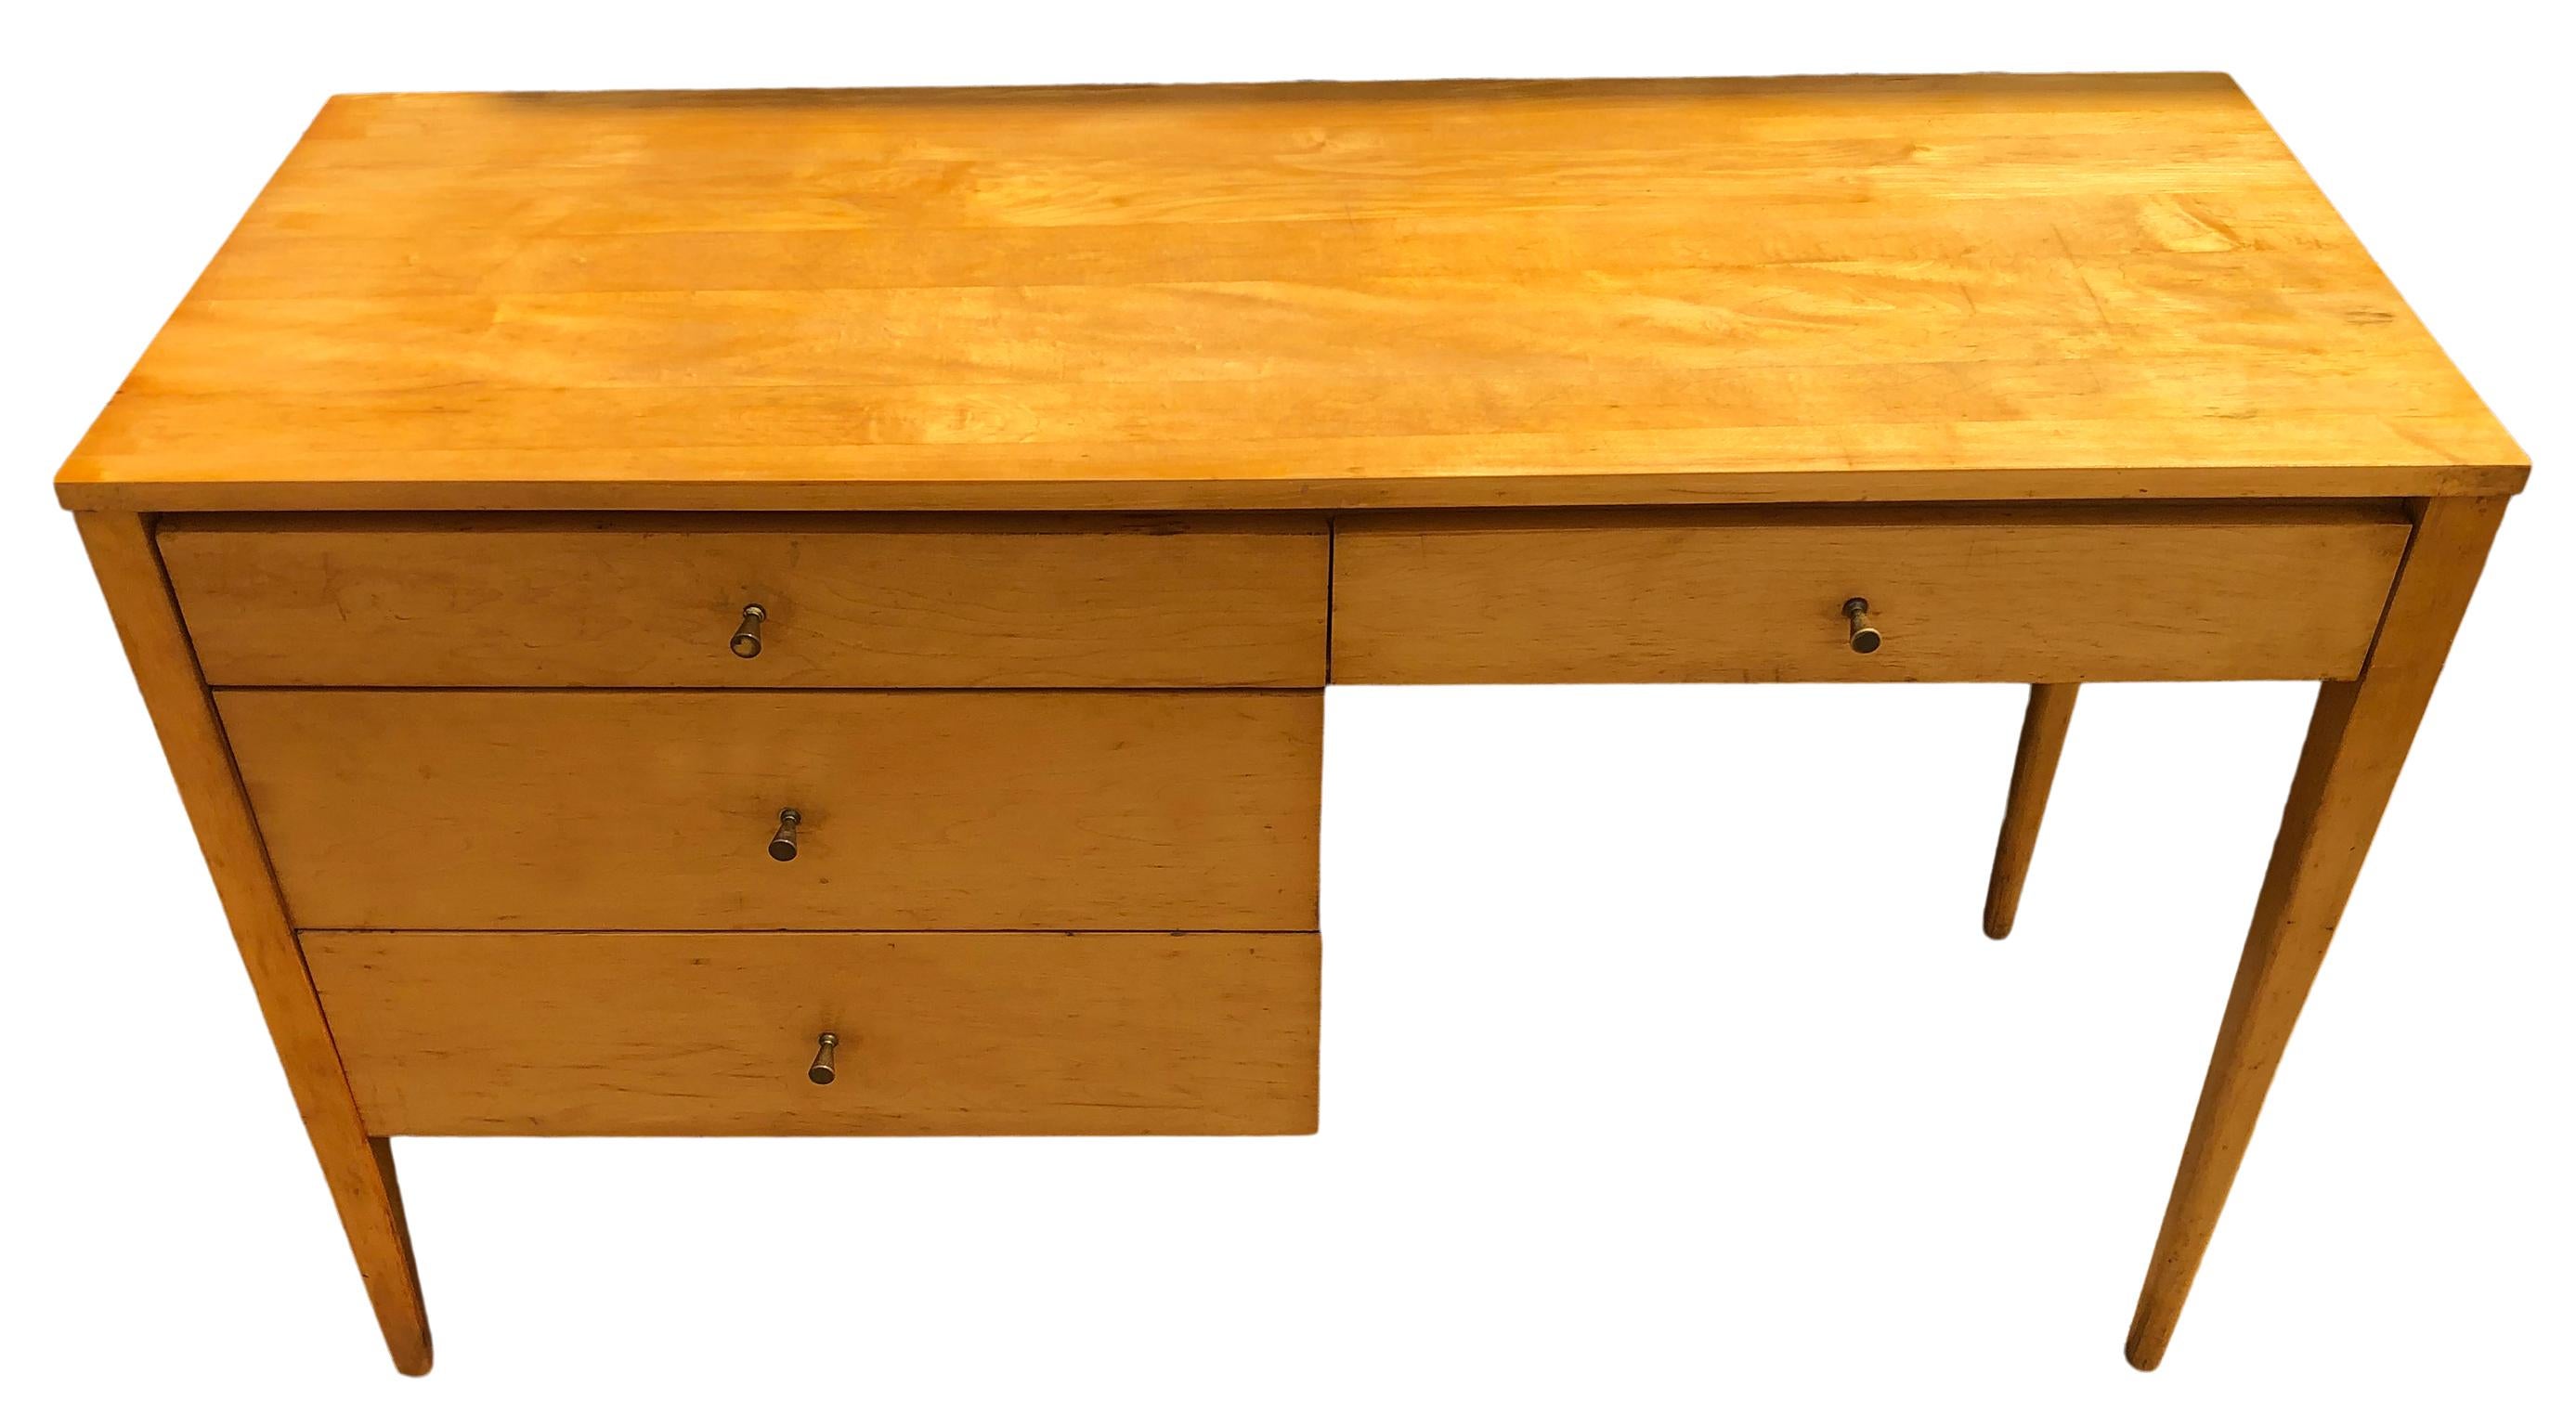 Beautiful Paul McCobb Planner Group #1567 four drawer desk blonde maple finish brass pulls solid maple. Desk is in original vintage condition. Very beautiful designed desk on straight legs - all solid maple. Designers by Paul McCobb - Built by